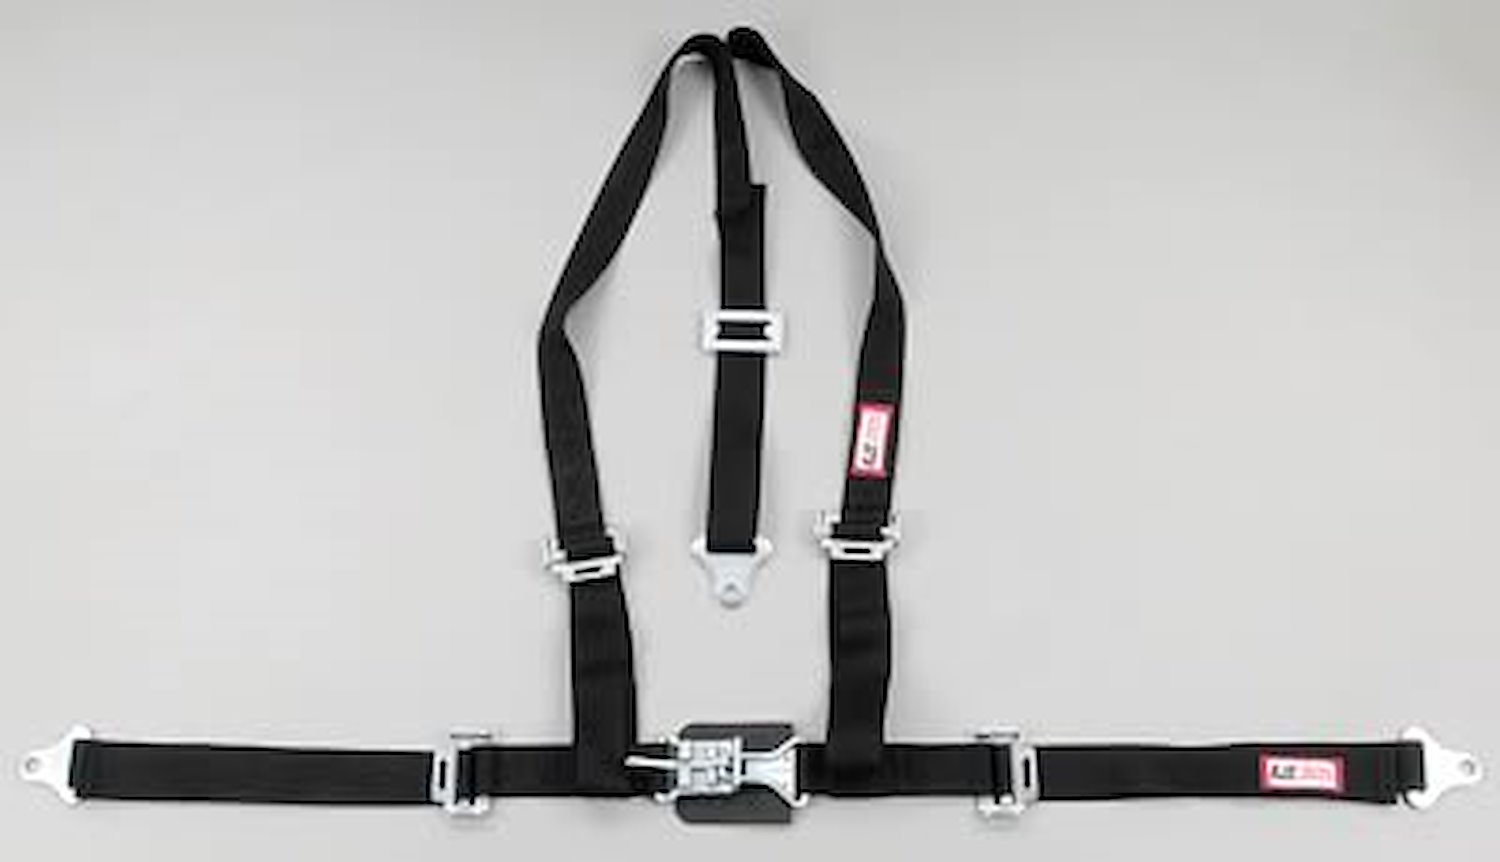 NON-SFI L&L HARNESS 2 PULL DOWN Lap Belt SEWN IN 2 S.H. INDIVIDUAL FLOOR Mount w/STERNUM STRAP ALL WRAP ENDS KHAKI